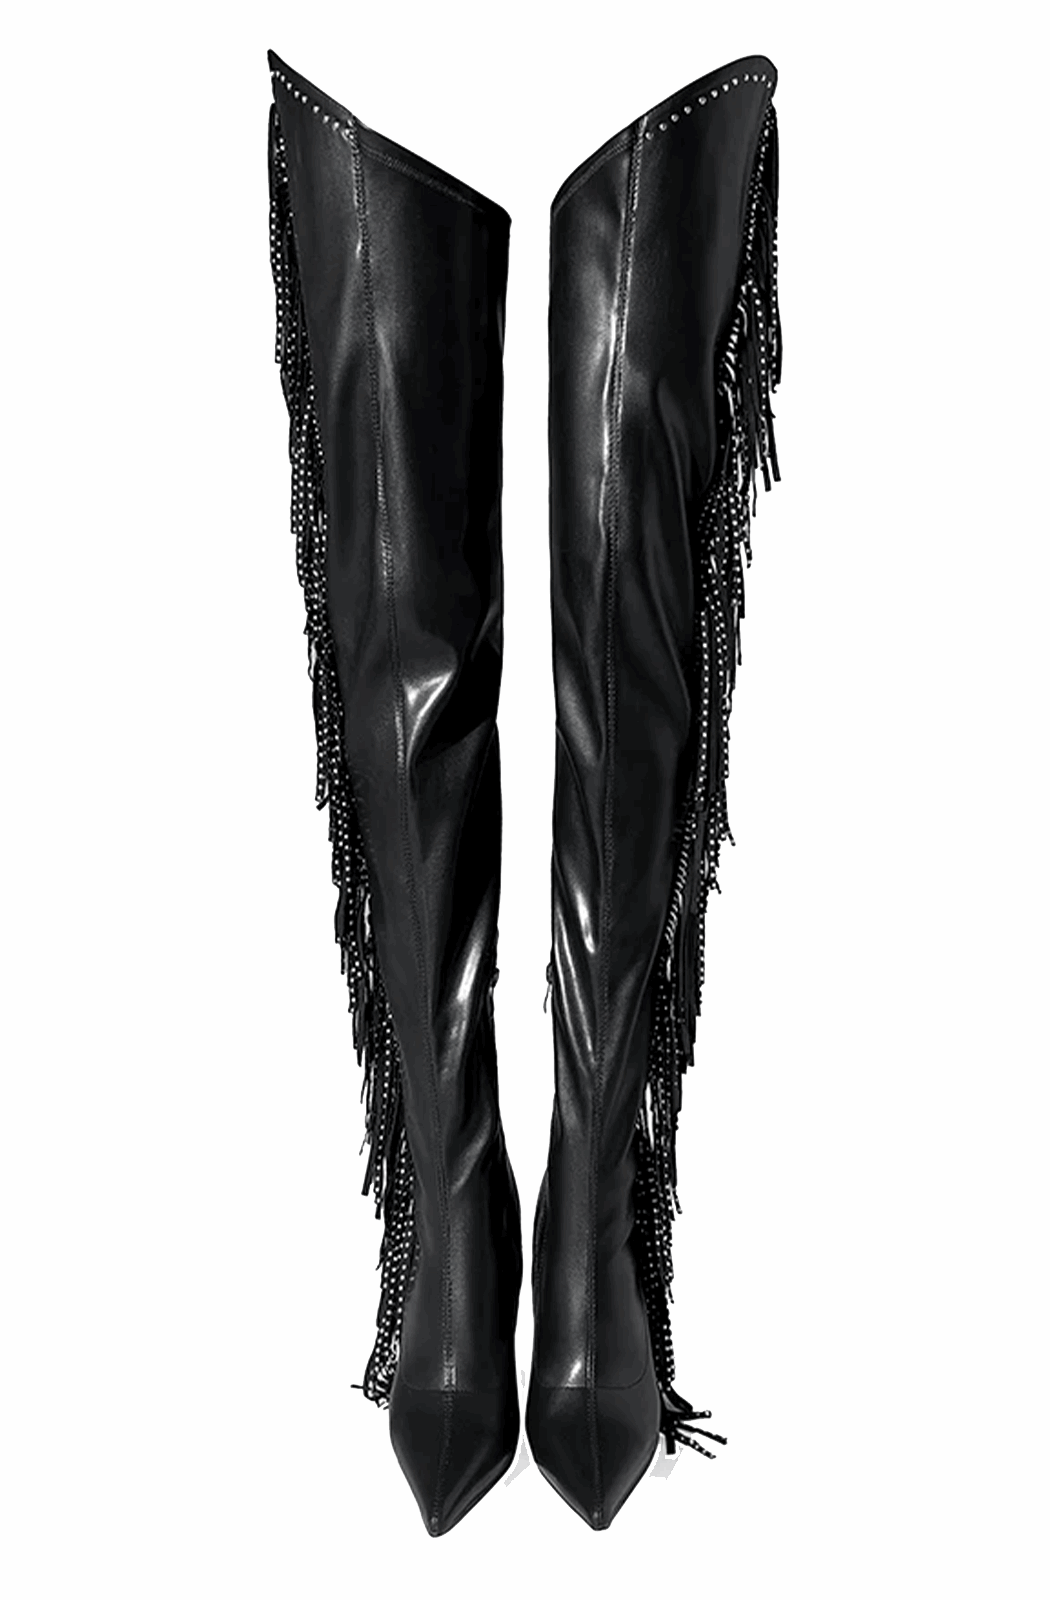 Western over the knee boots with fringes